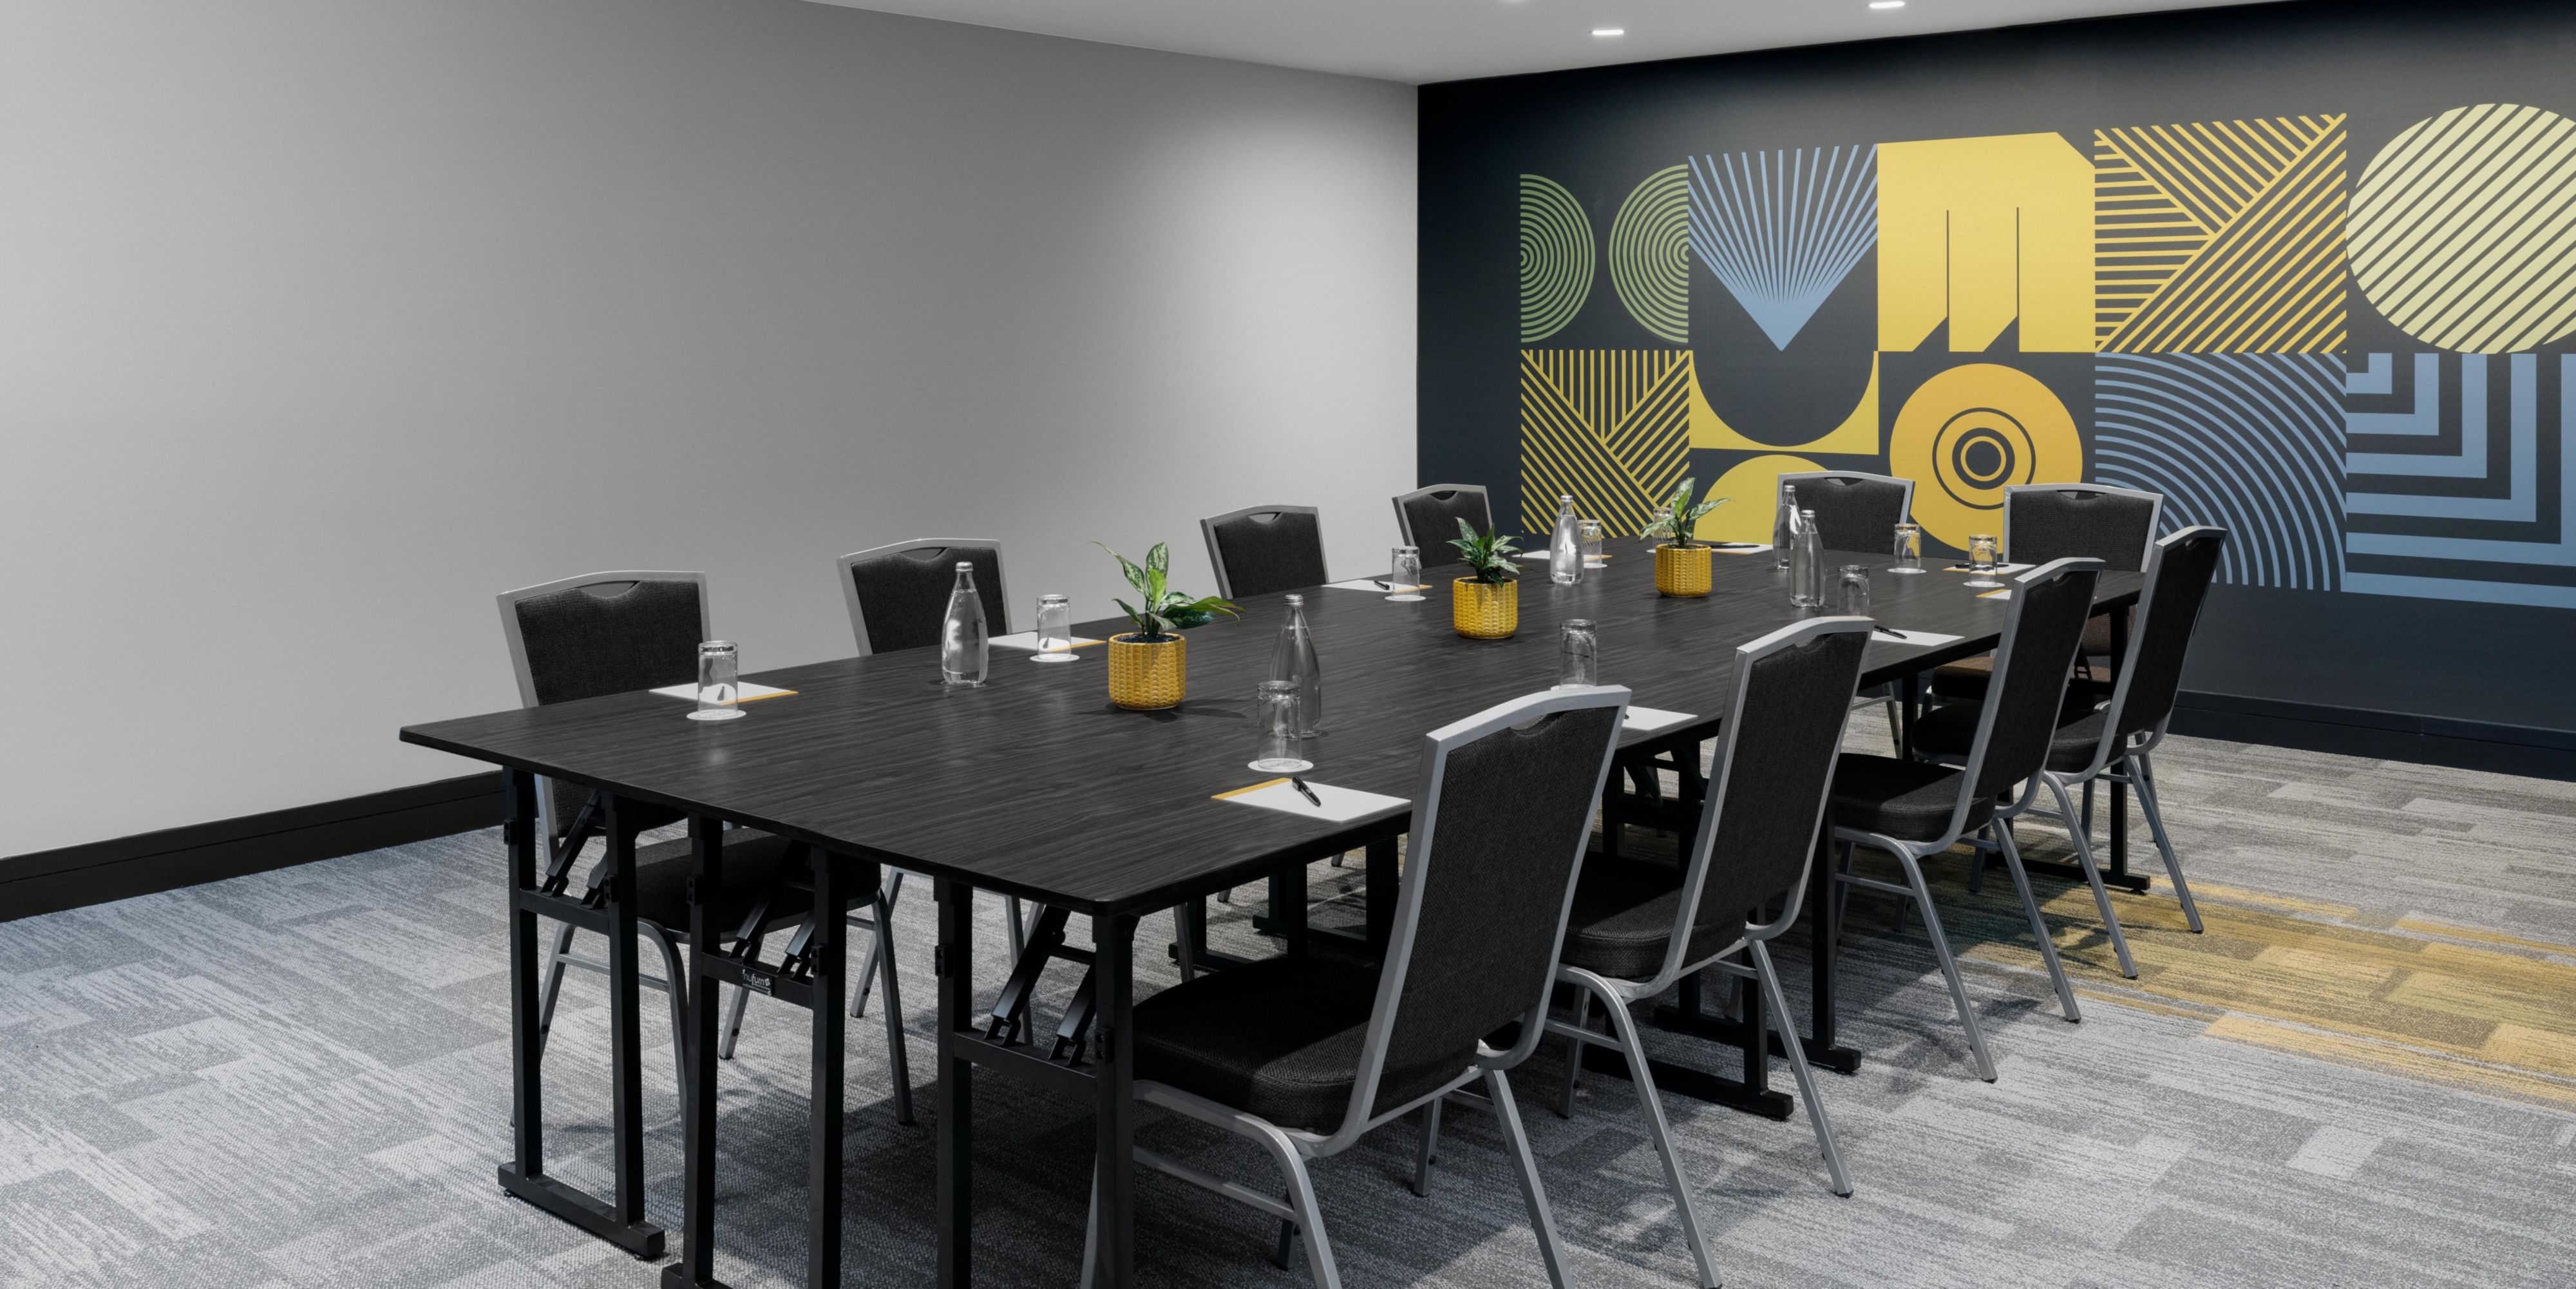 Whether an intimate board meeting or extravagant birthday celebration, we have the perfect space for your function at voco® Brisbane City Centre. Take your pick of 11 rooms ranging from 36m² up to a generous 645m², each showcasing our signature voco™ design flourish.